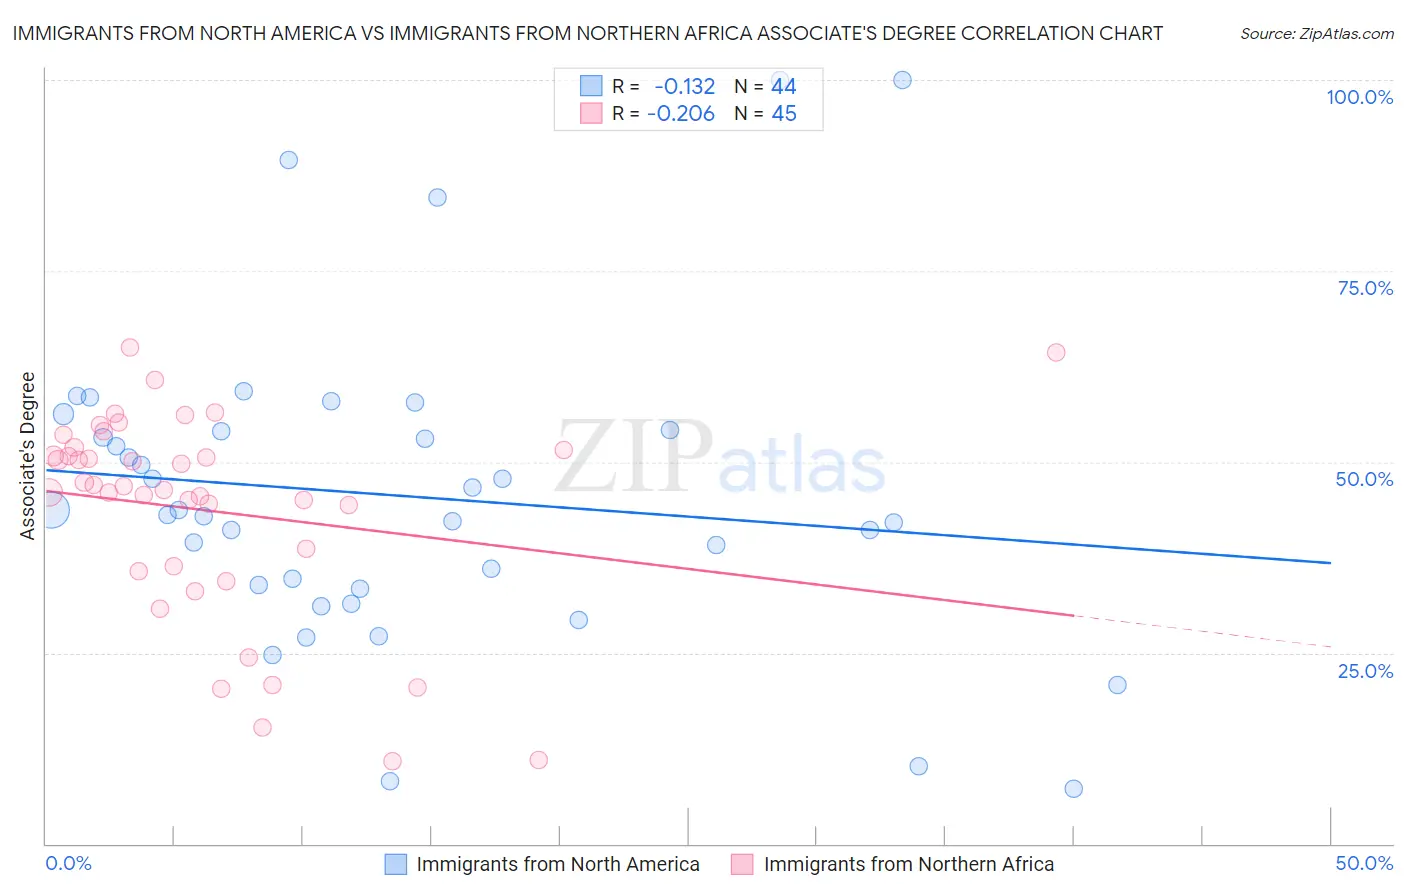 Immigrants from North America vs Immigrants from Northern Africa Associate's Degree